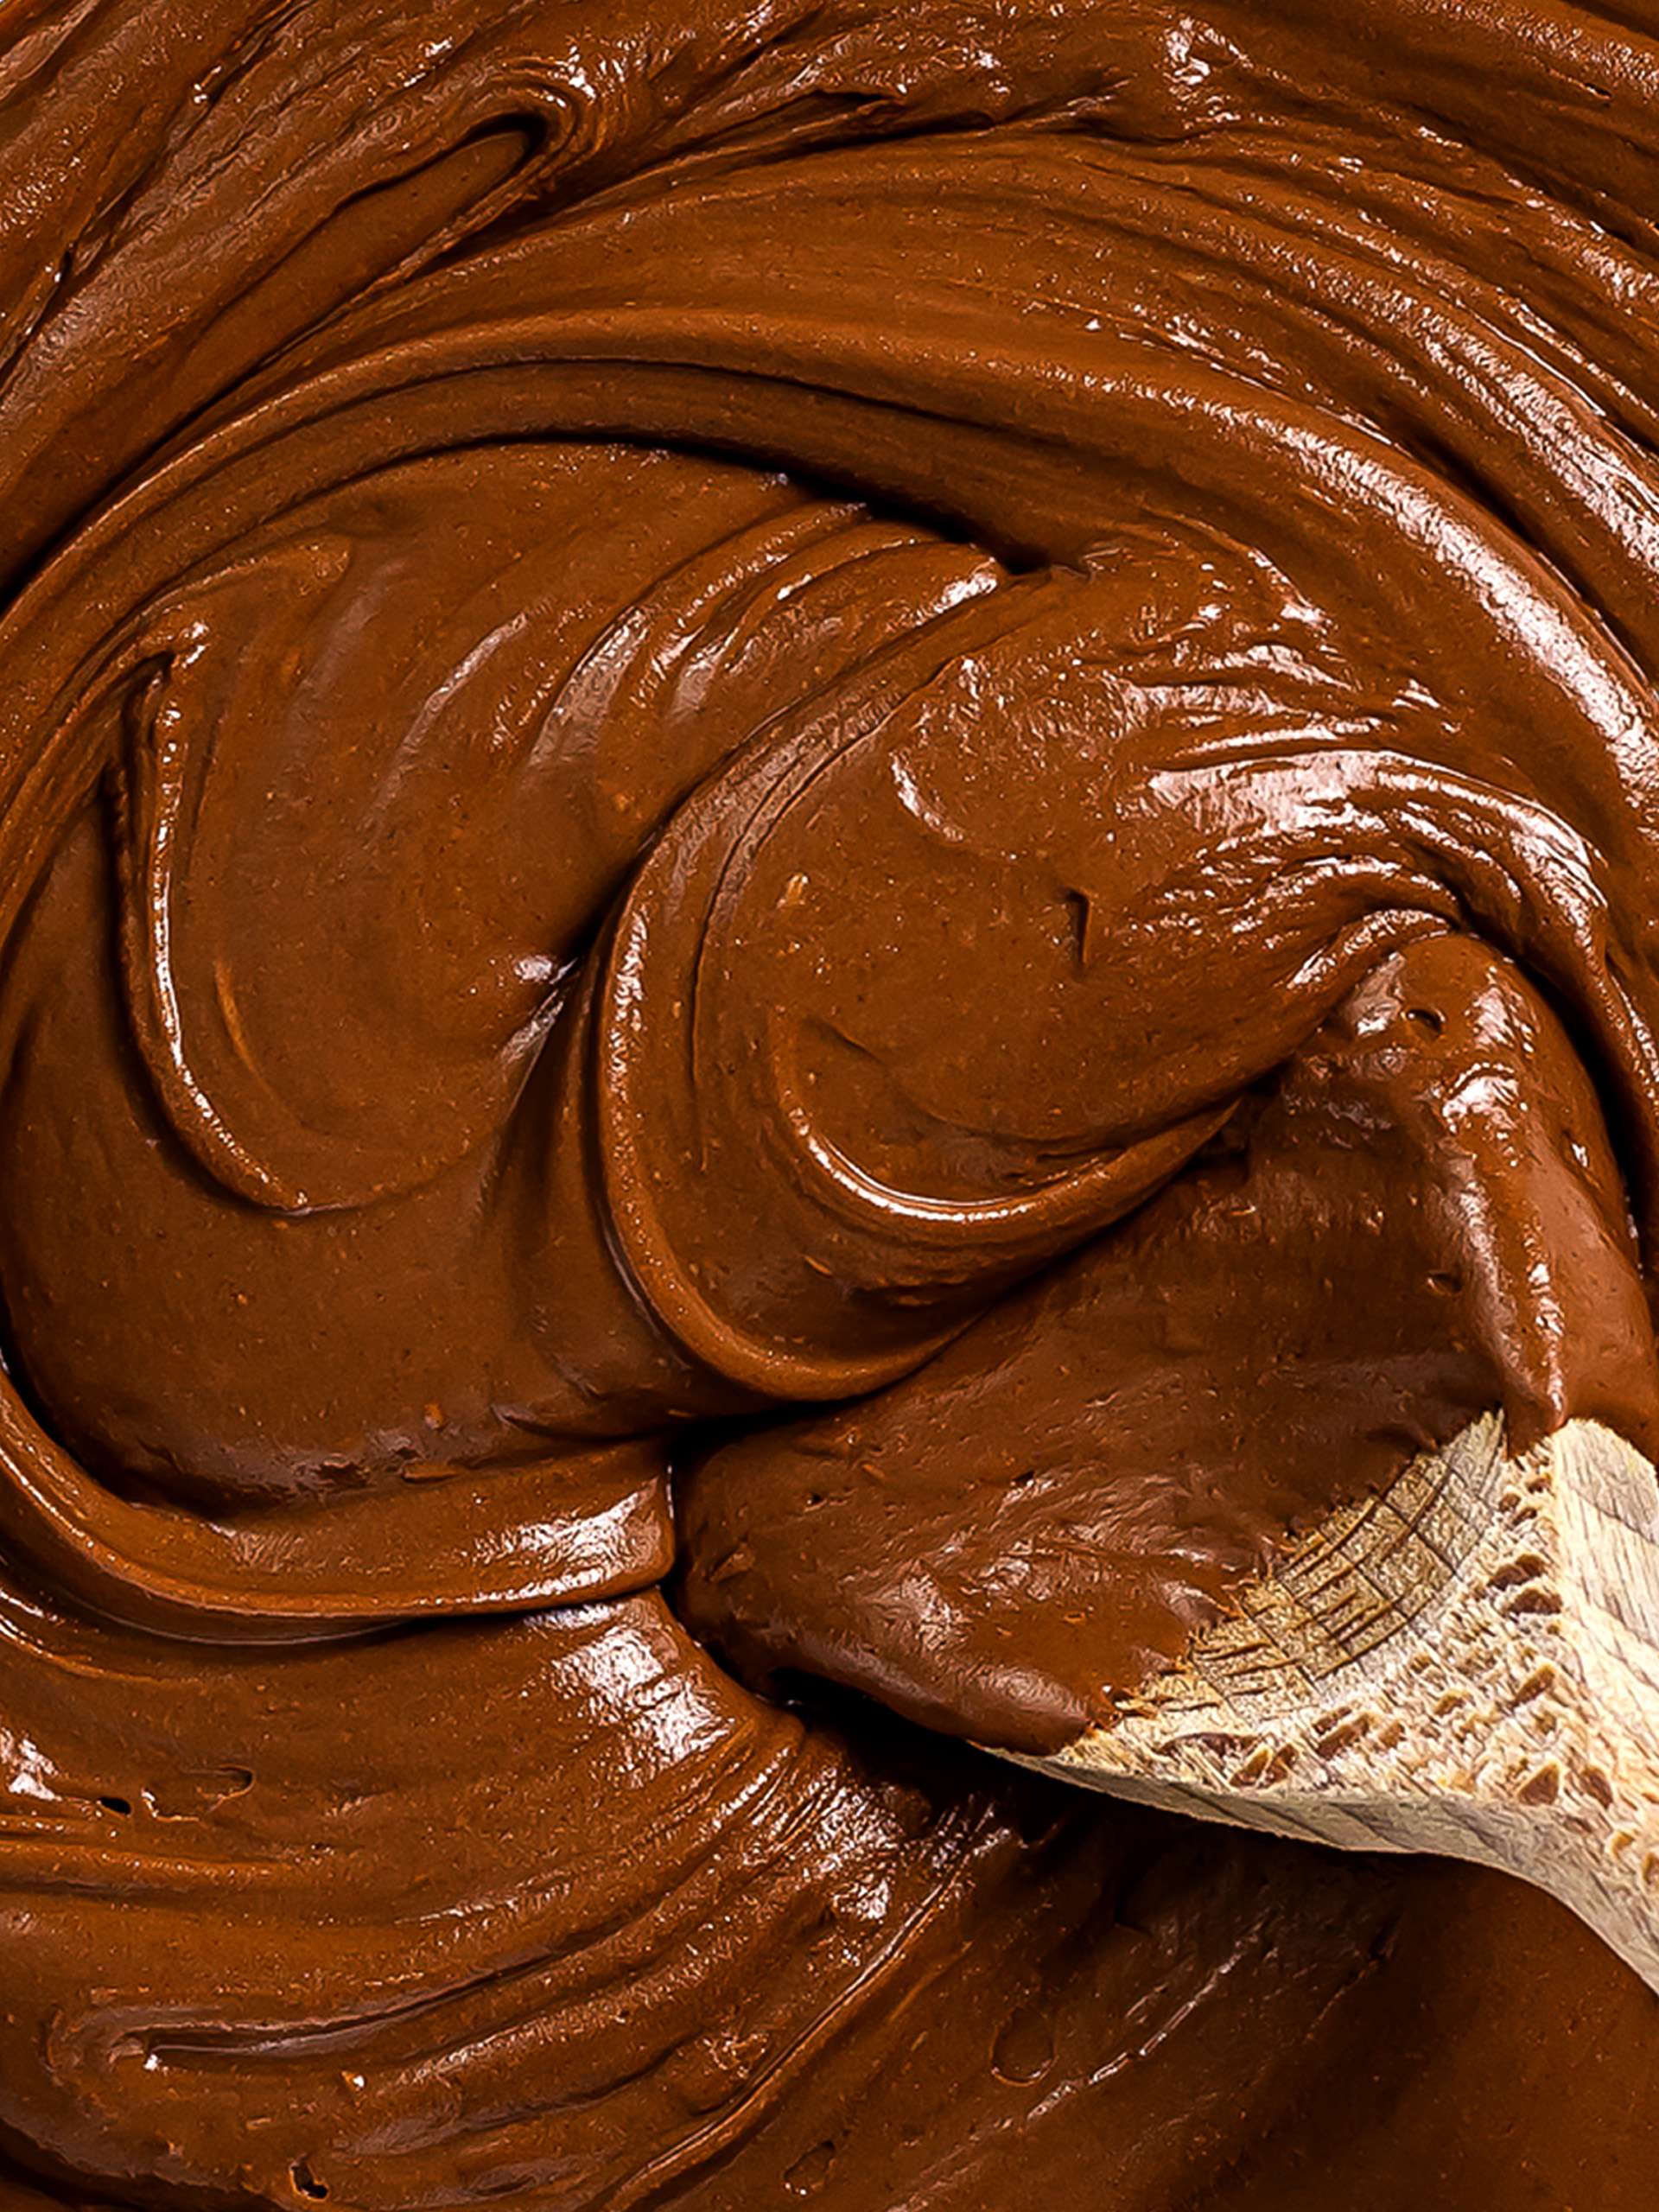 Craving Chocolate? Try These 8 Healthy Recipes